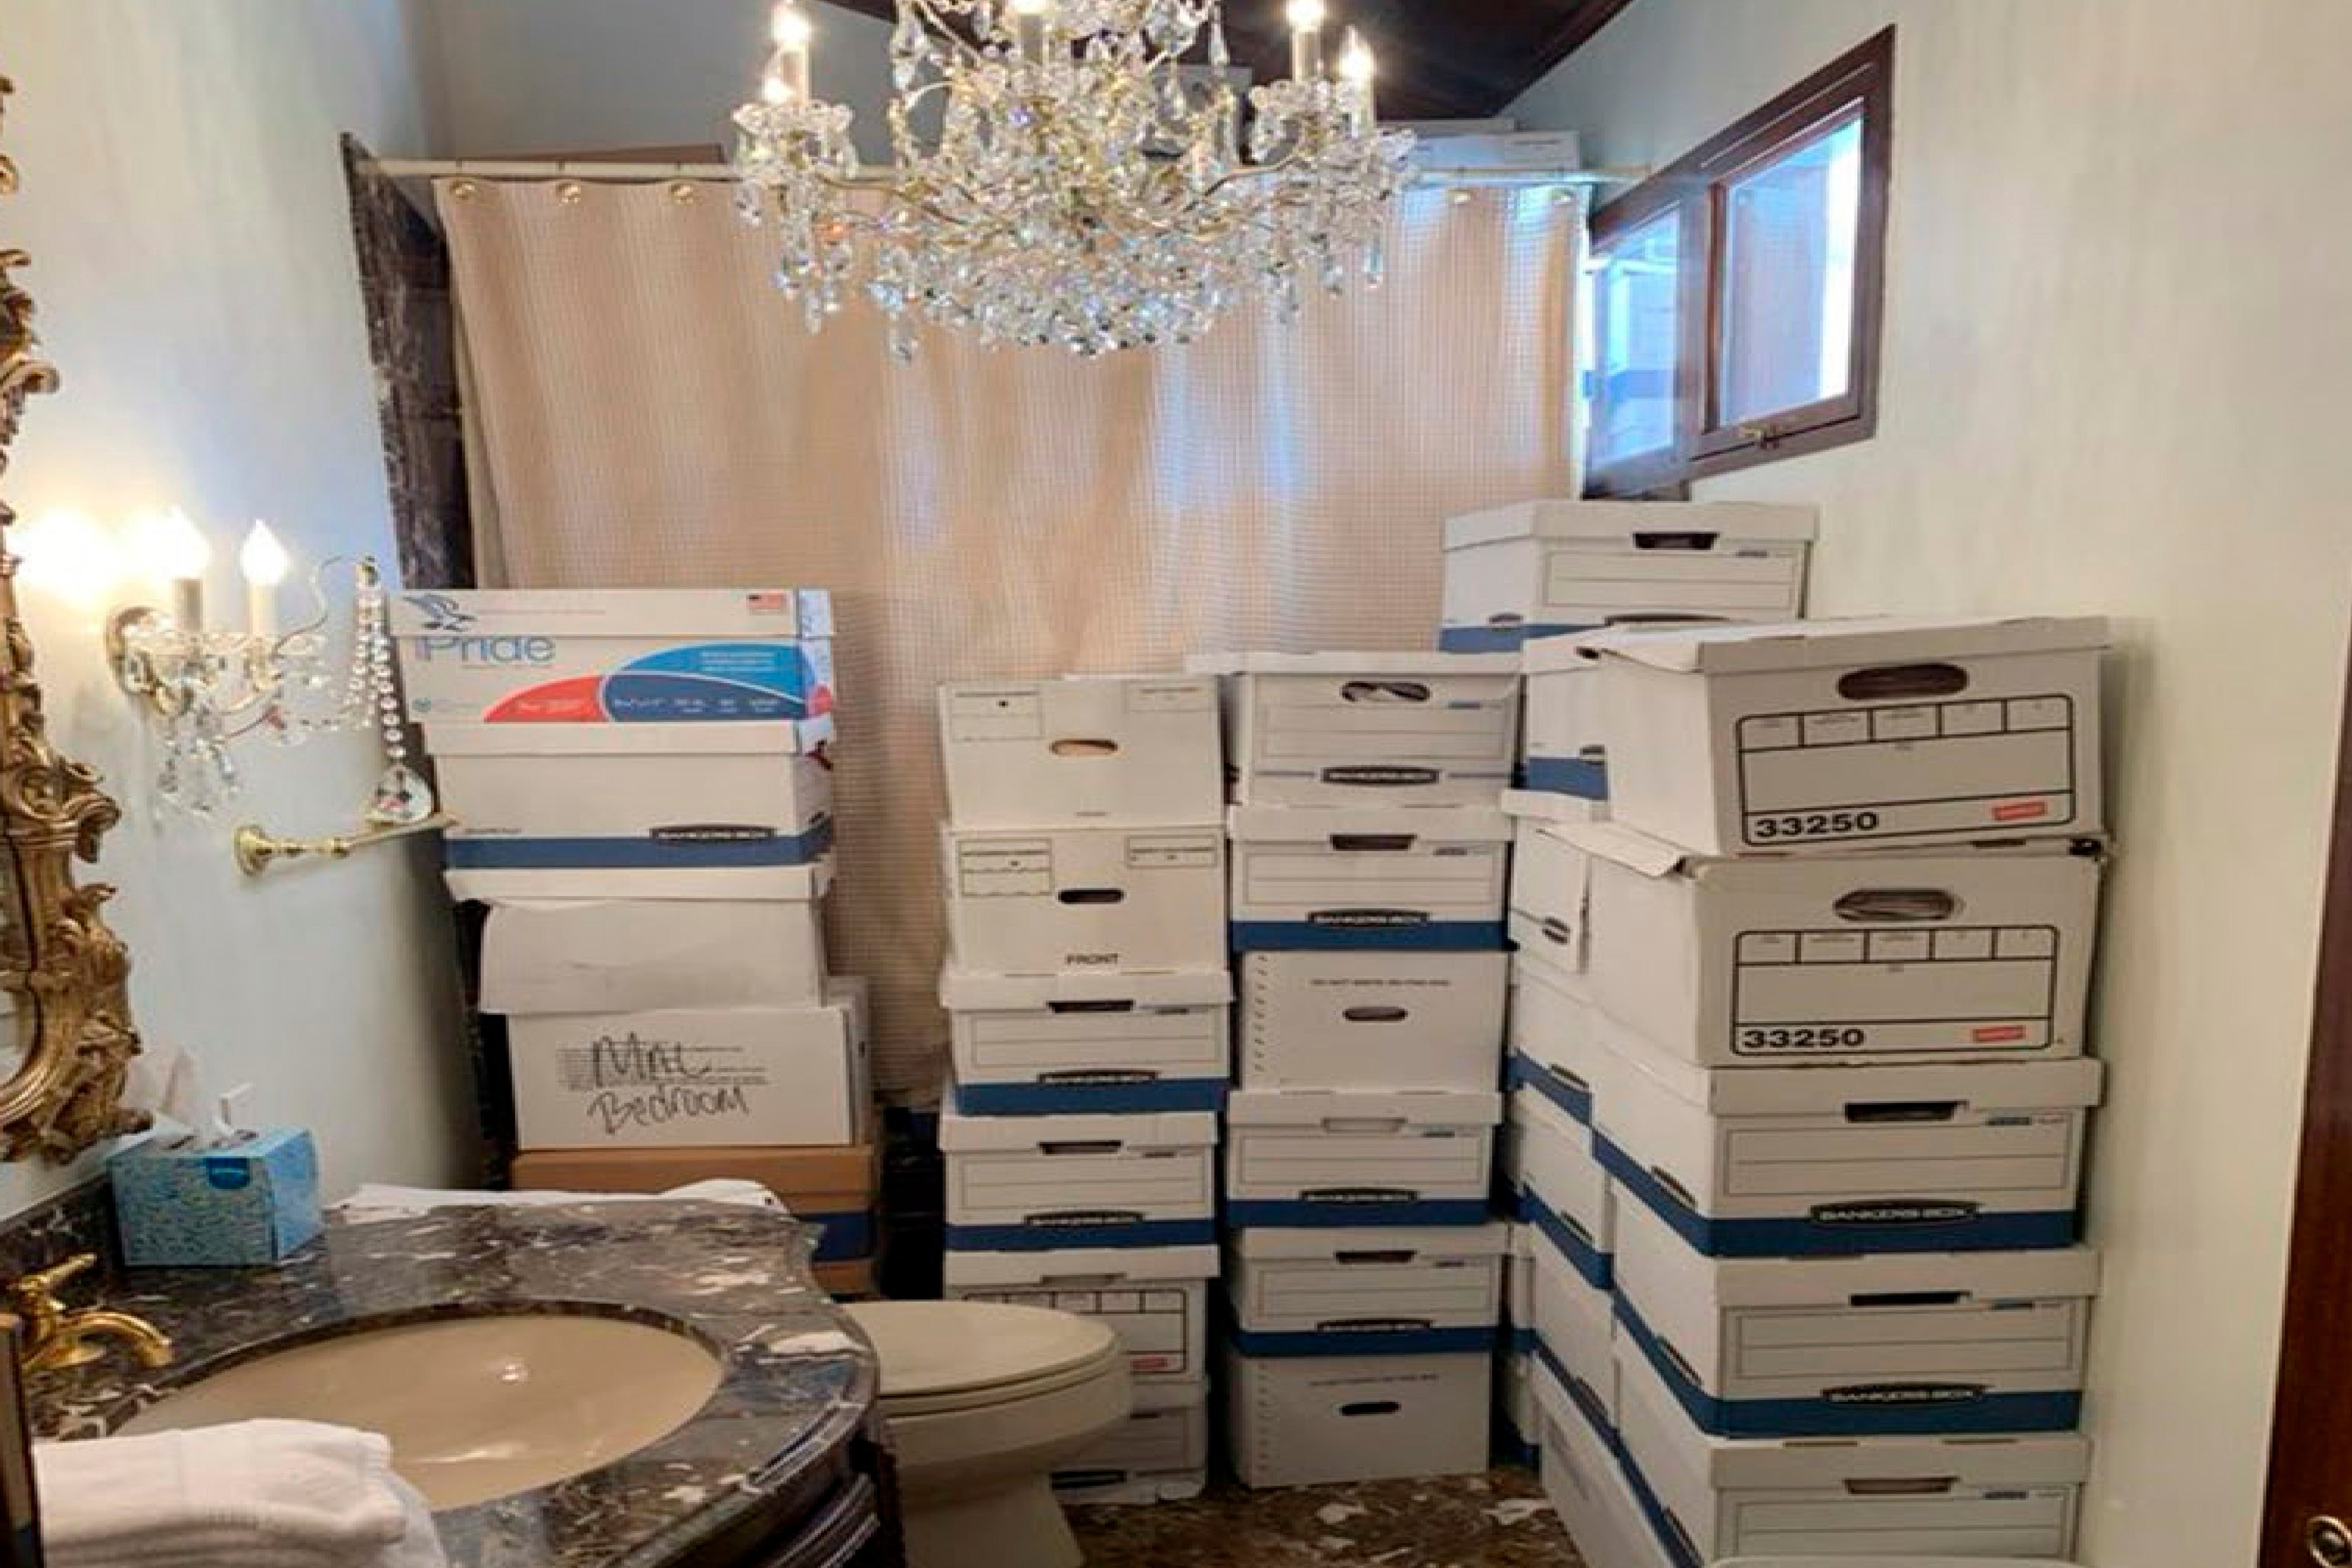 Boxes of documents were stored in Mr Trump’s bathroom at Mar-a-Lago